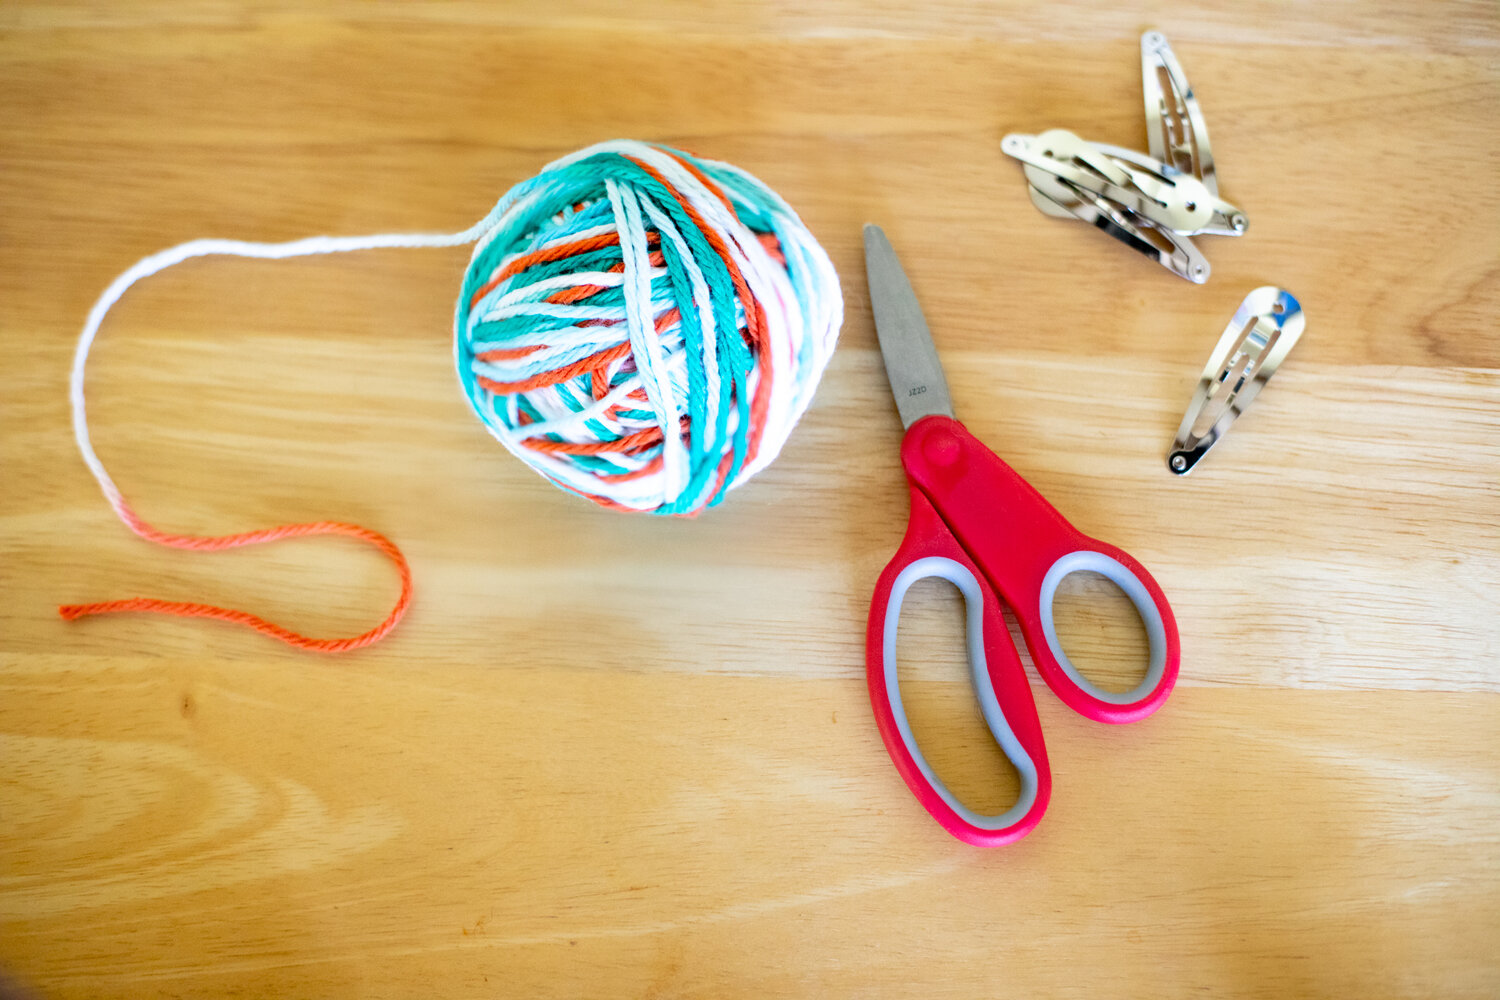 How To Wind A Yarn Ball By Hand Without Any Tools! 